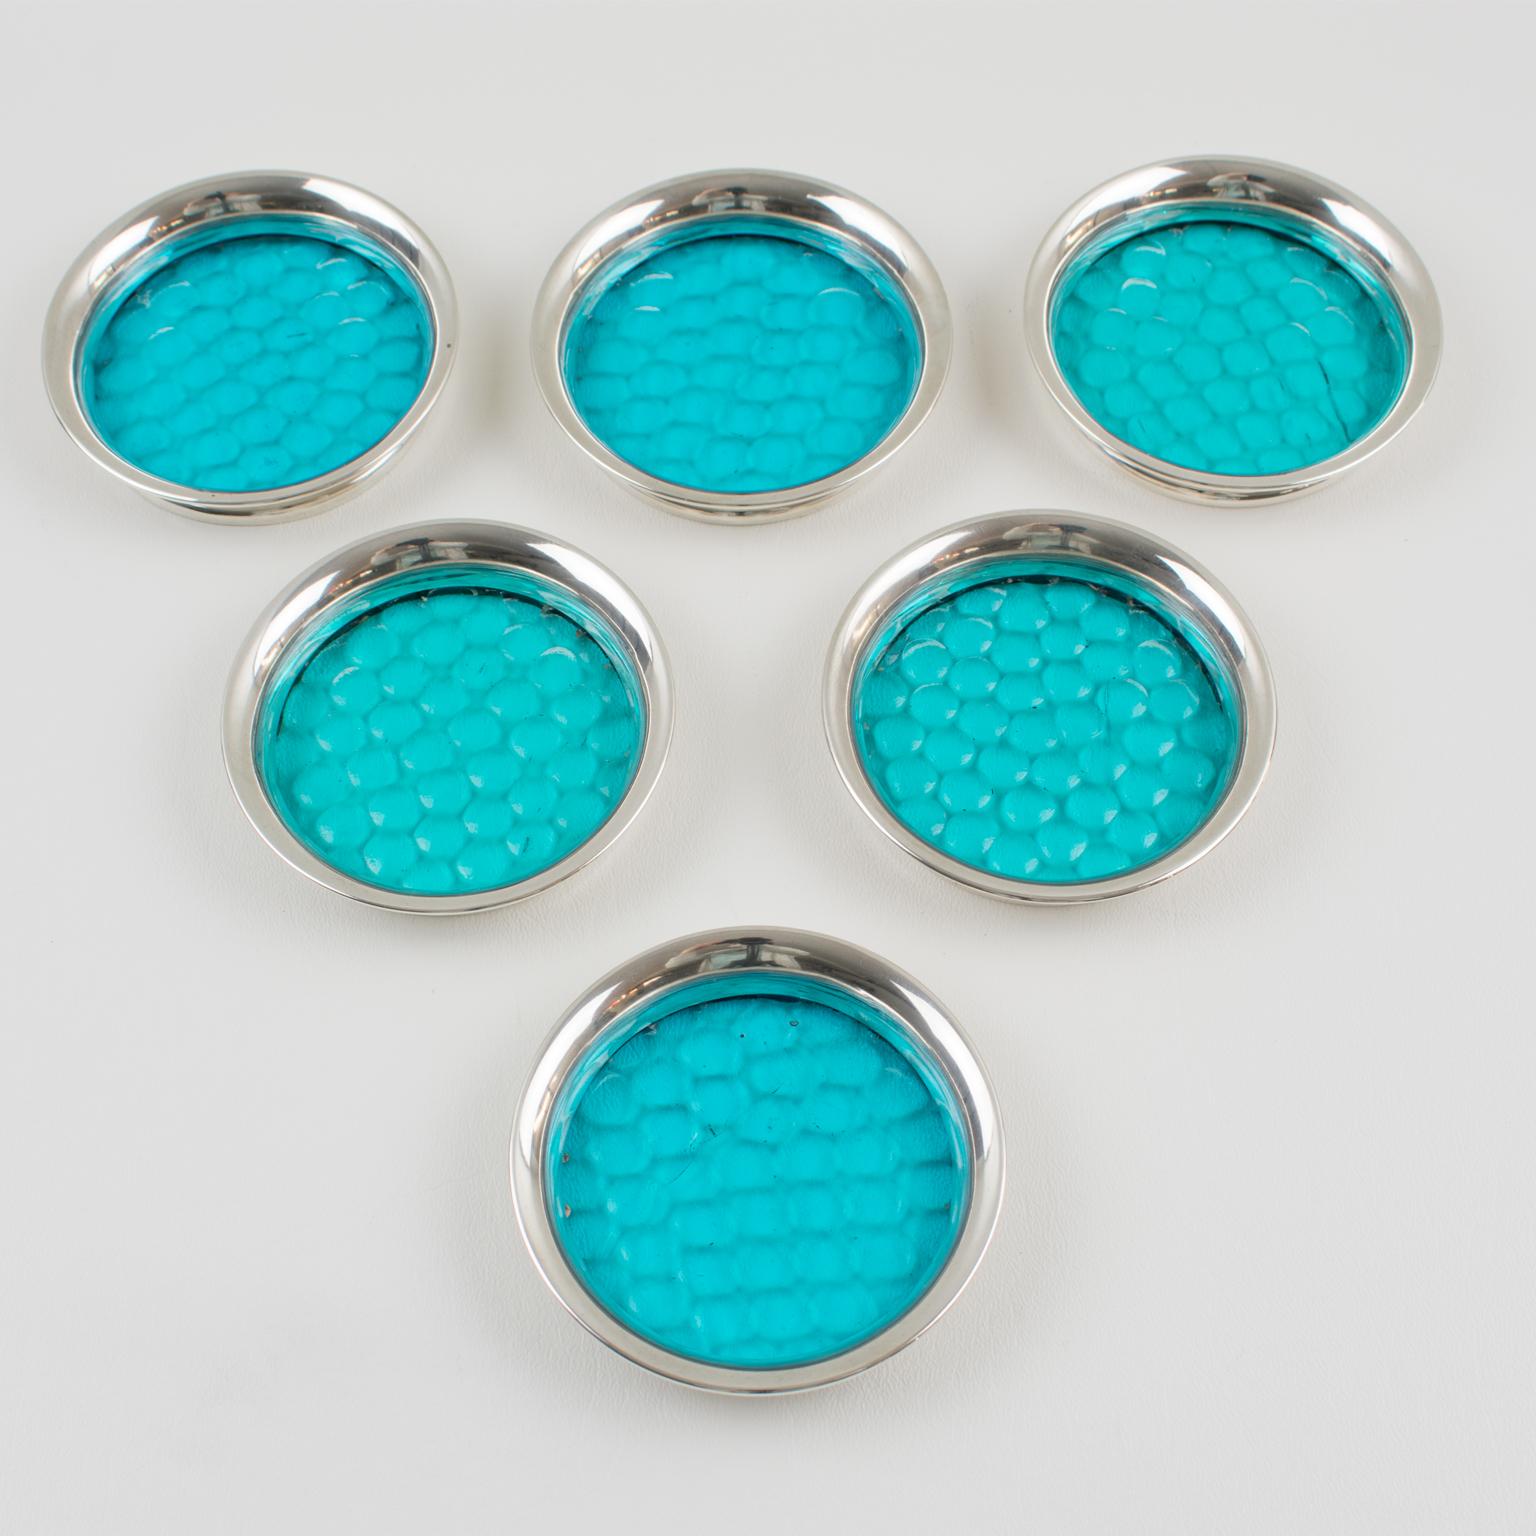 Elegant modernist barware set of six wine or cocktail coasters, made by Henry Clifford Davis, Birmingham, England. Minimalist round shape with sterling silver rim and decorative blue 